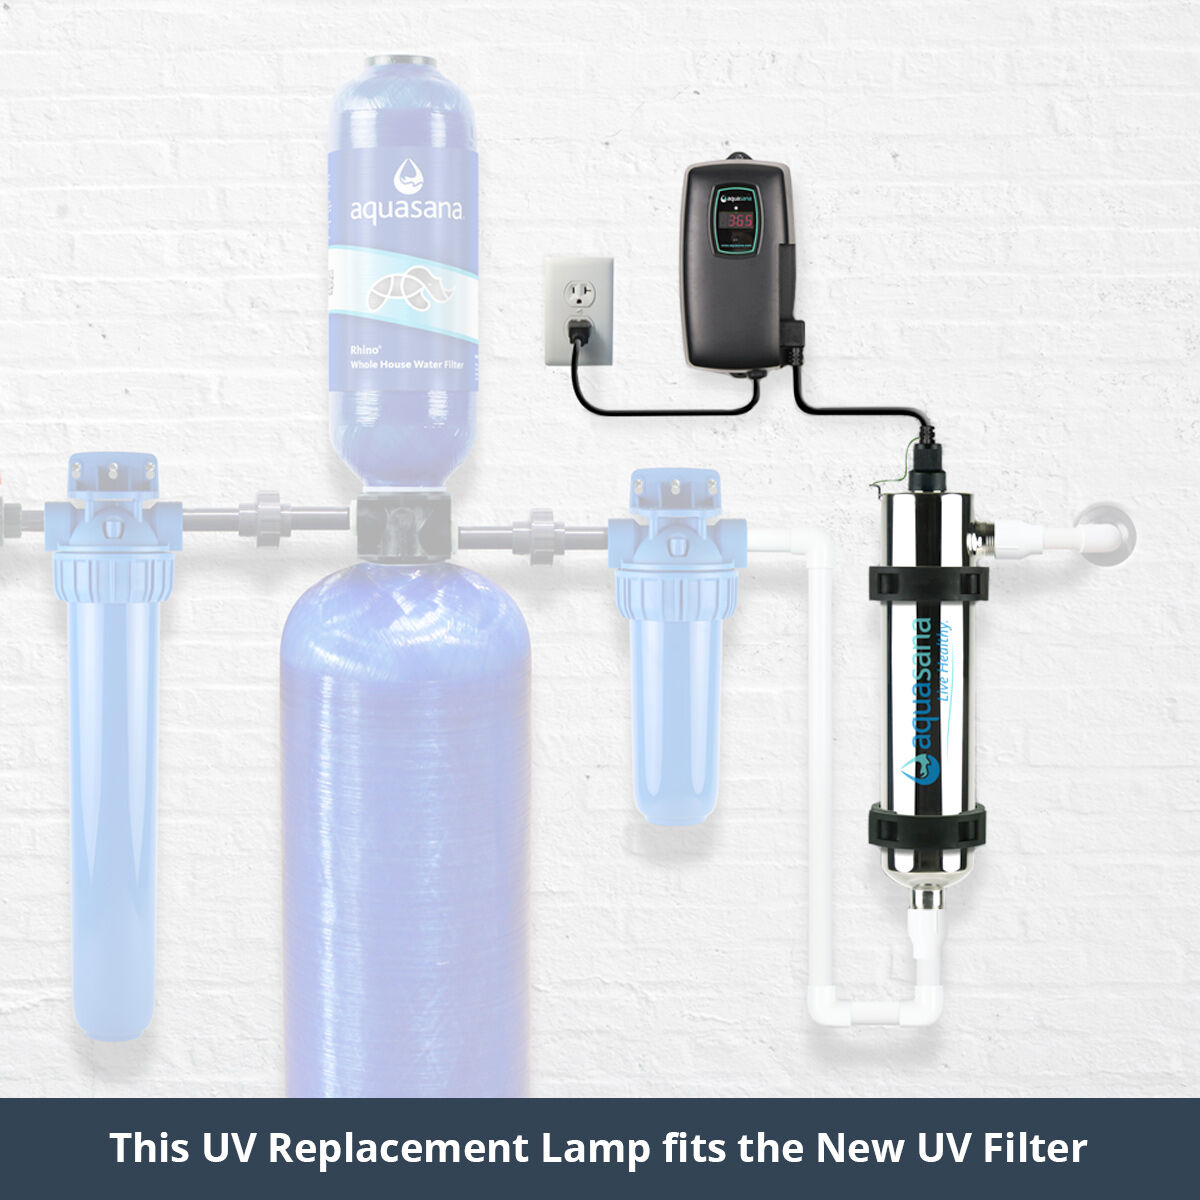 New UV Replacement Lamp